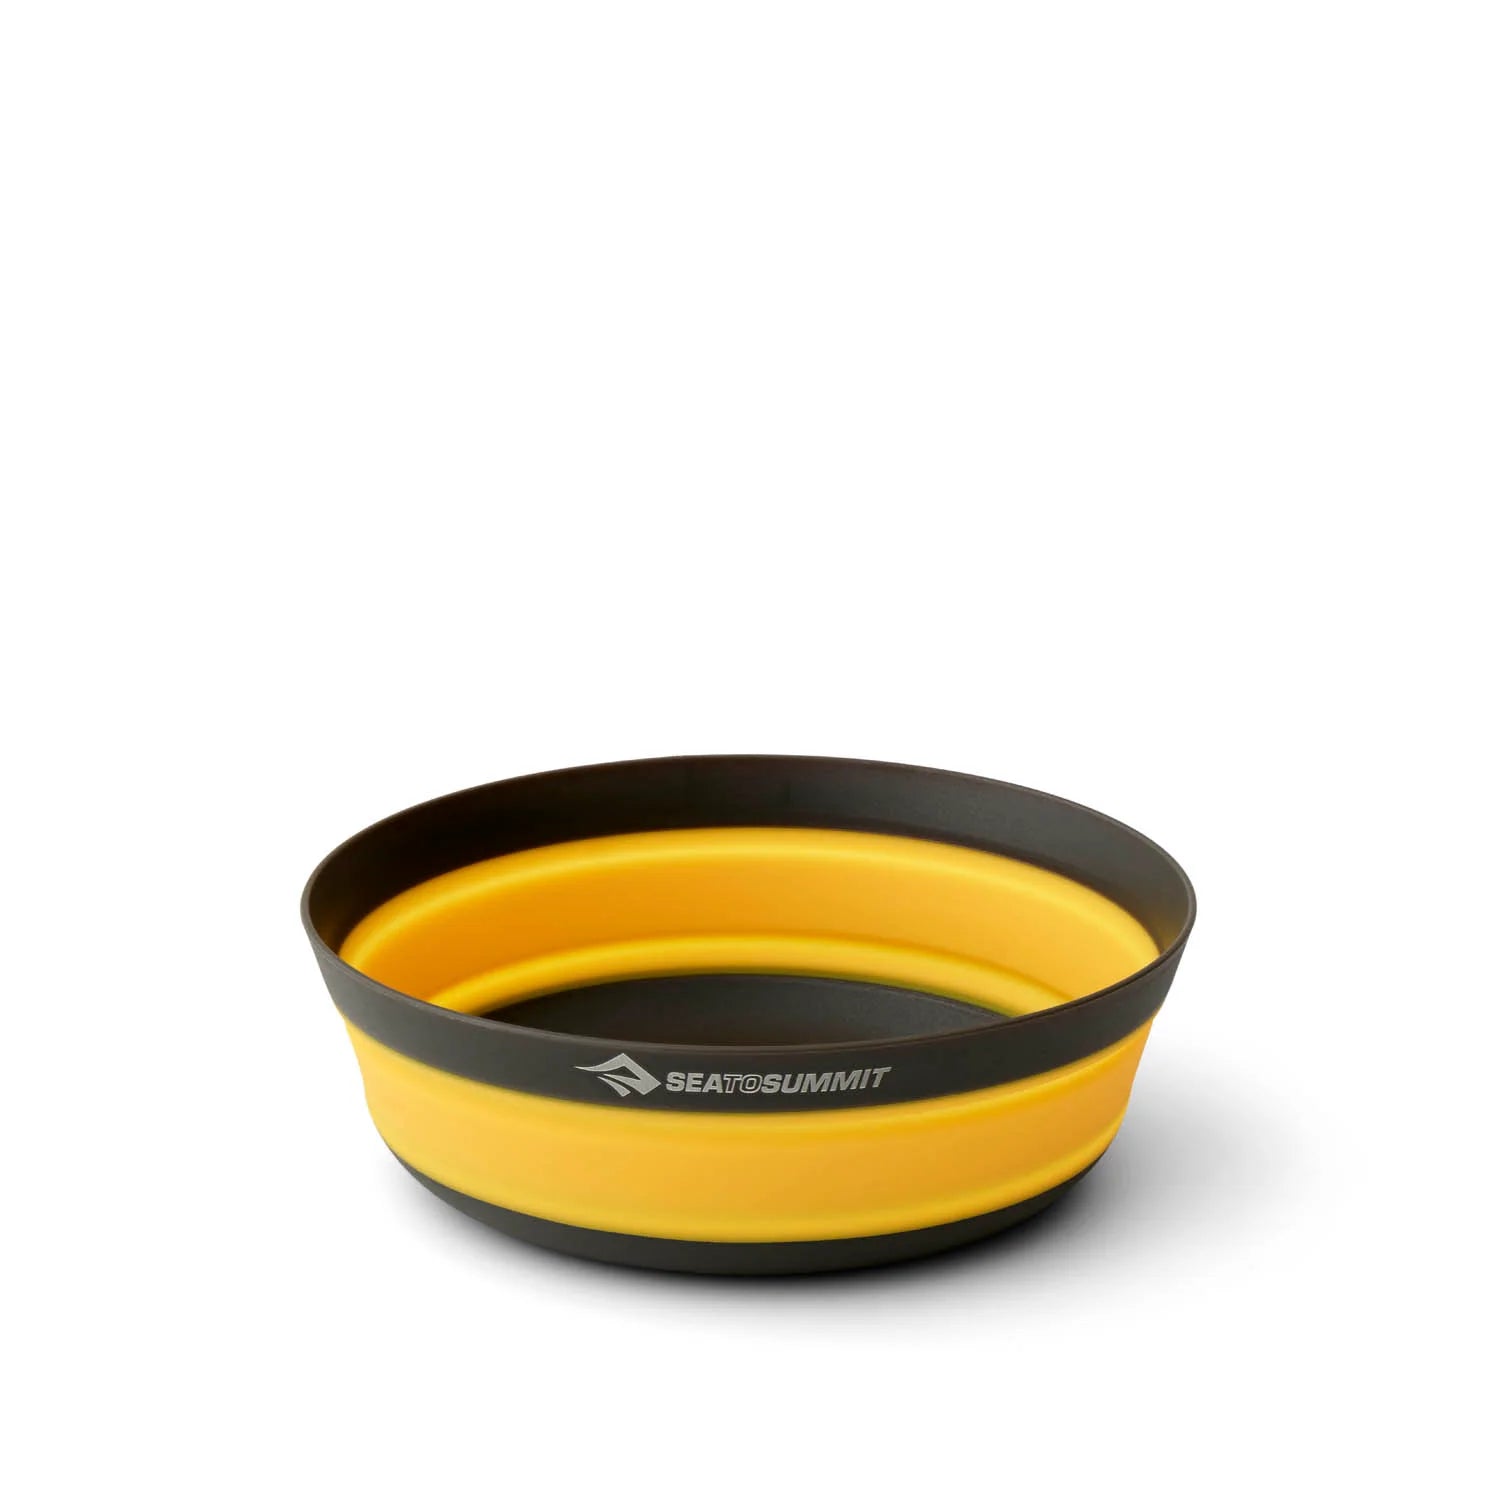 Sea To Summit Frontier UL Collapsible Bowl - M - Yellow